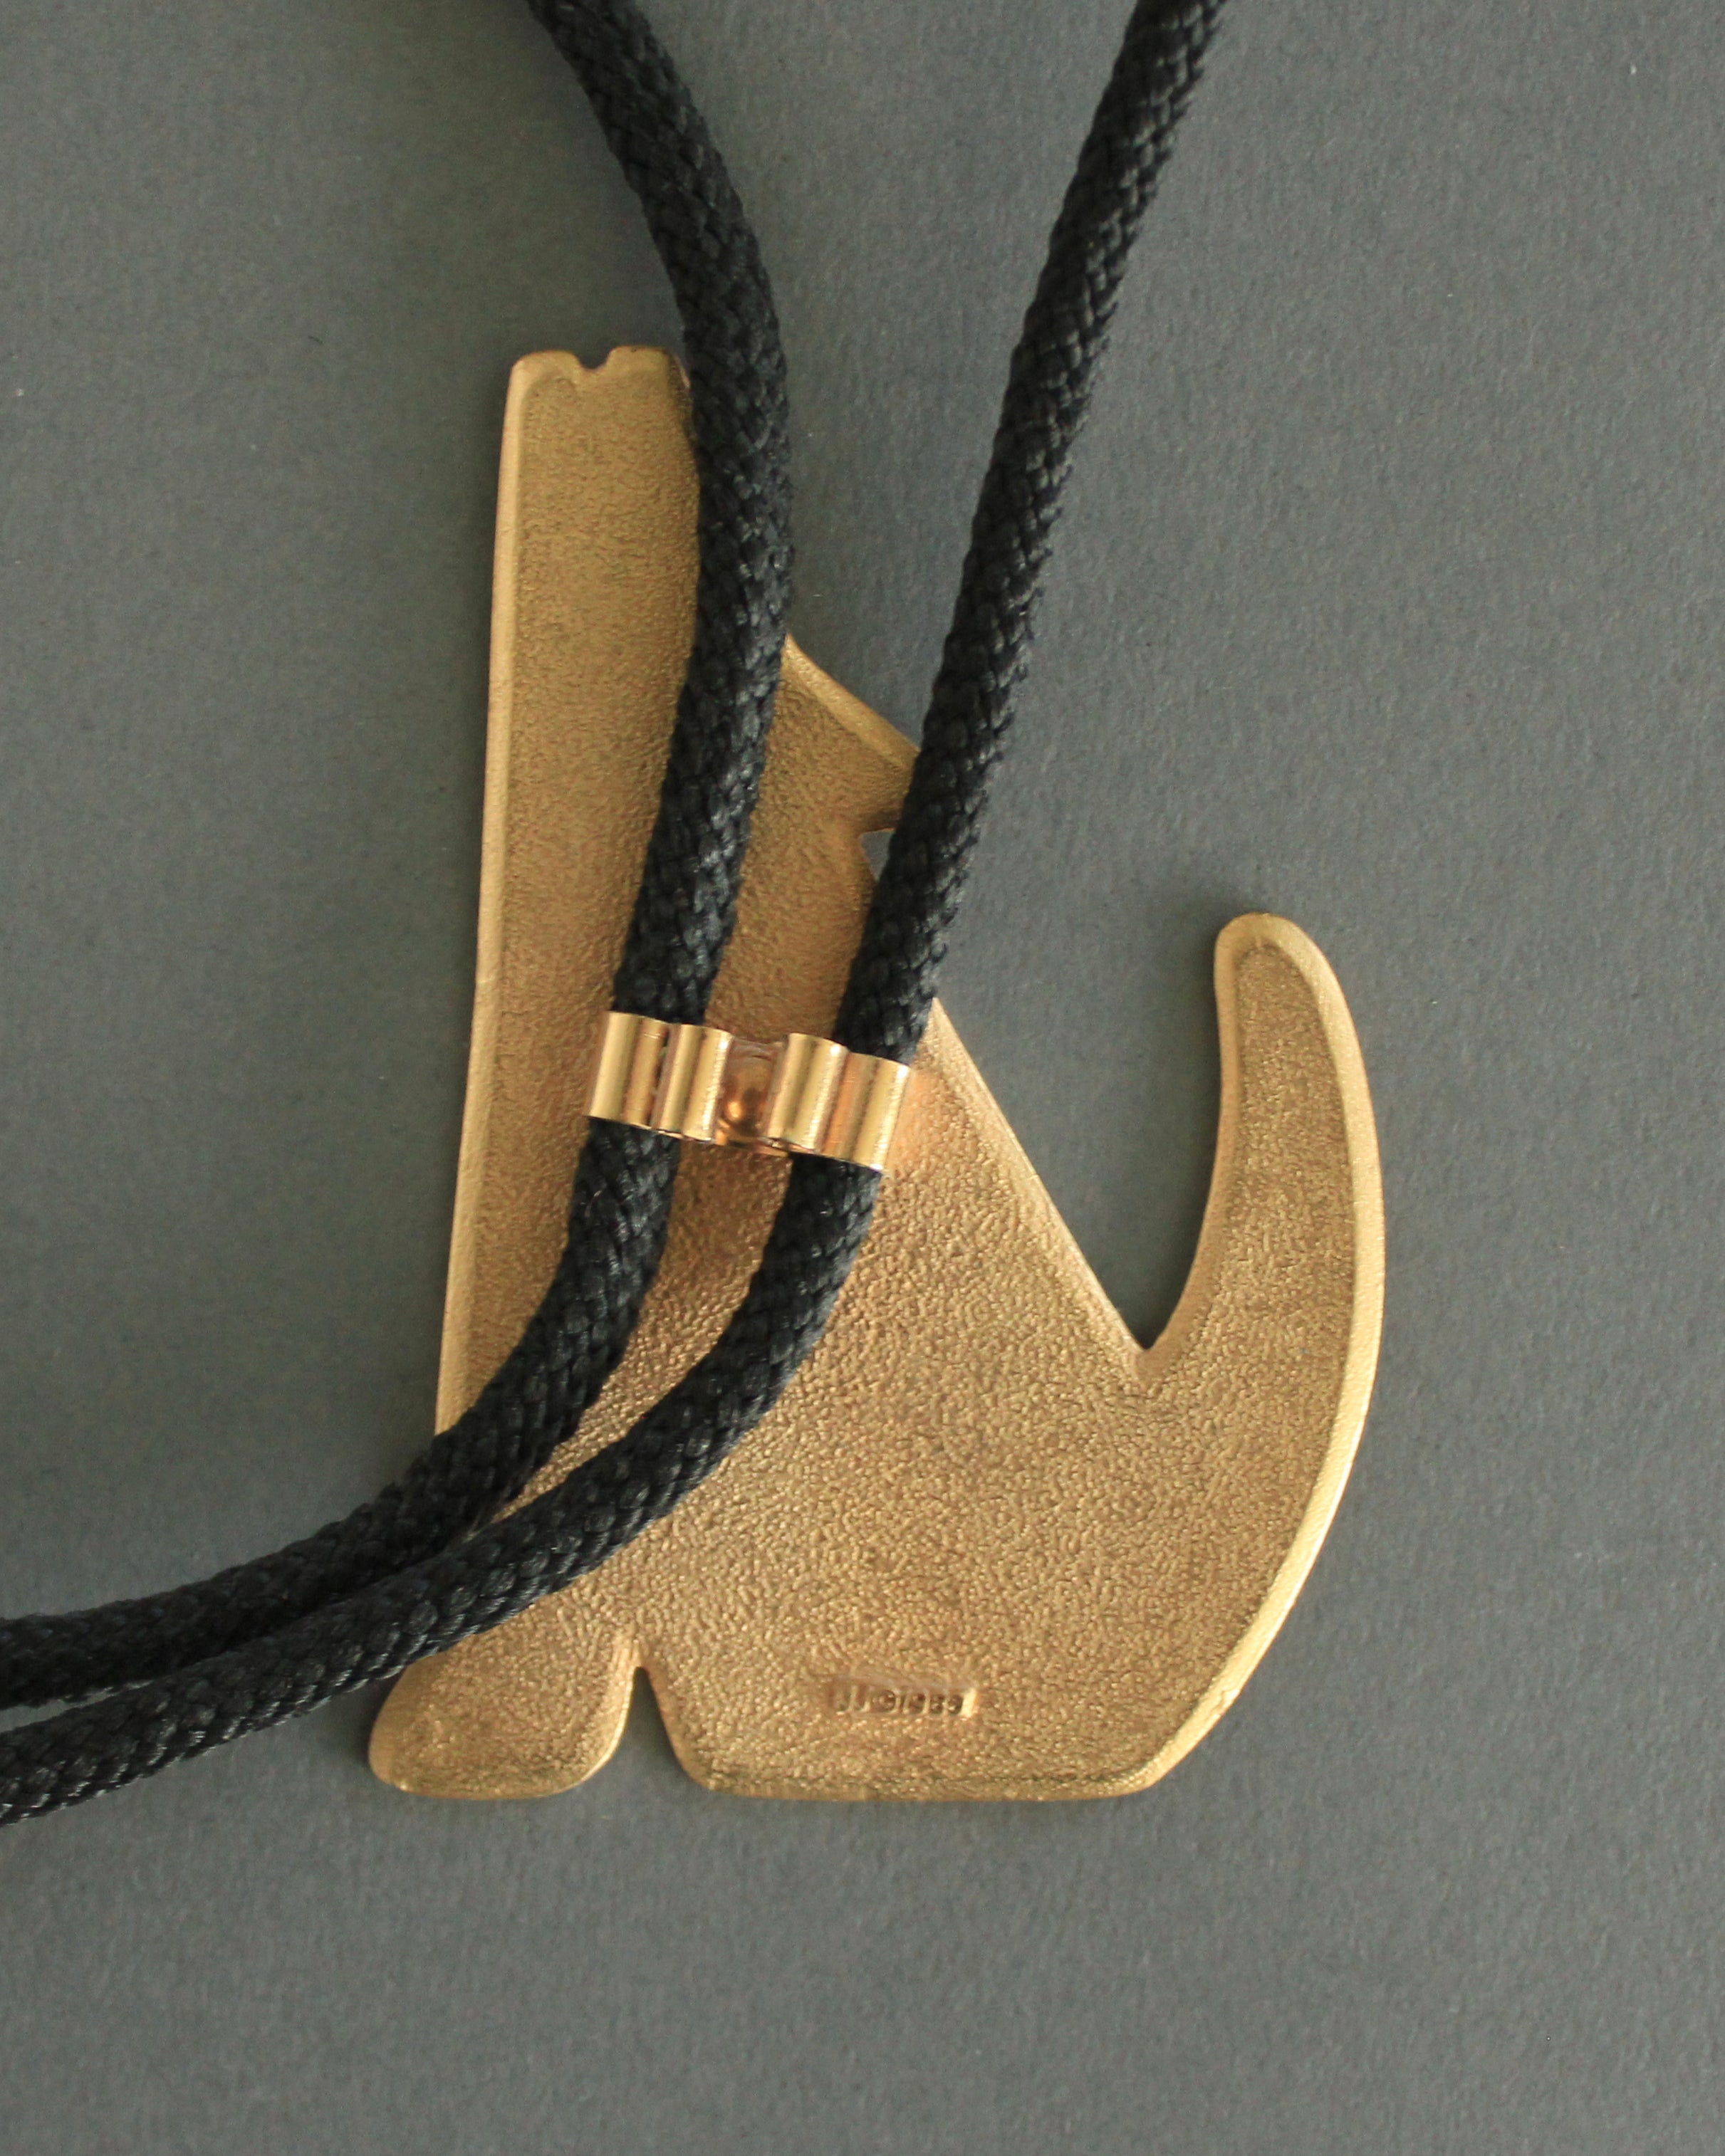 gold howling coyote 80s bolo tie 